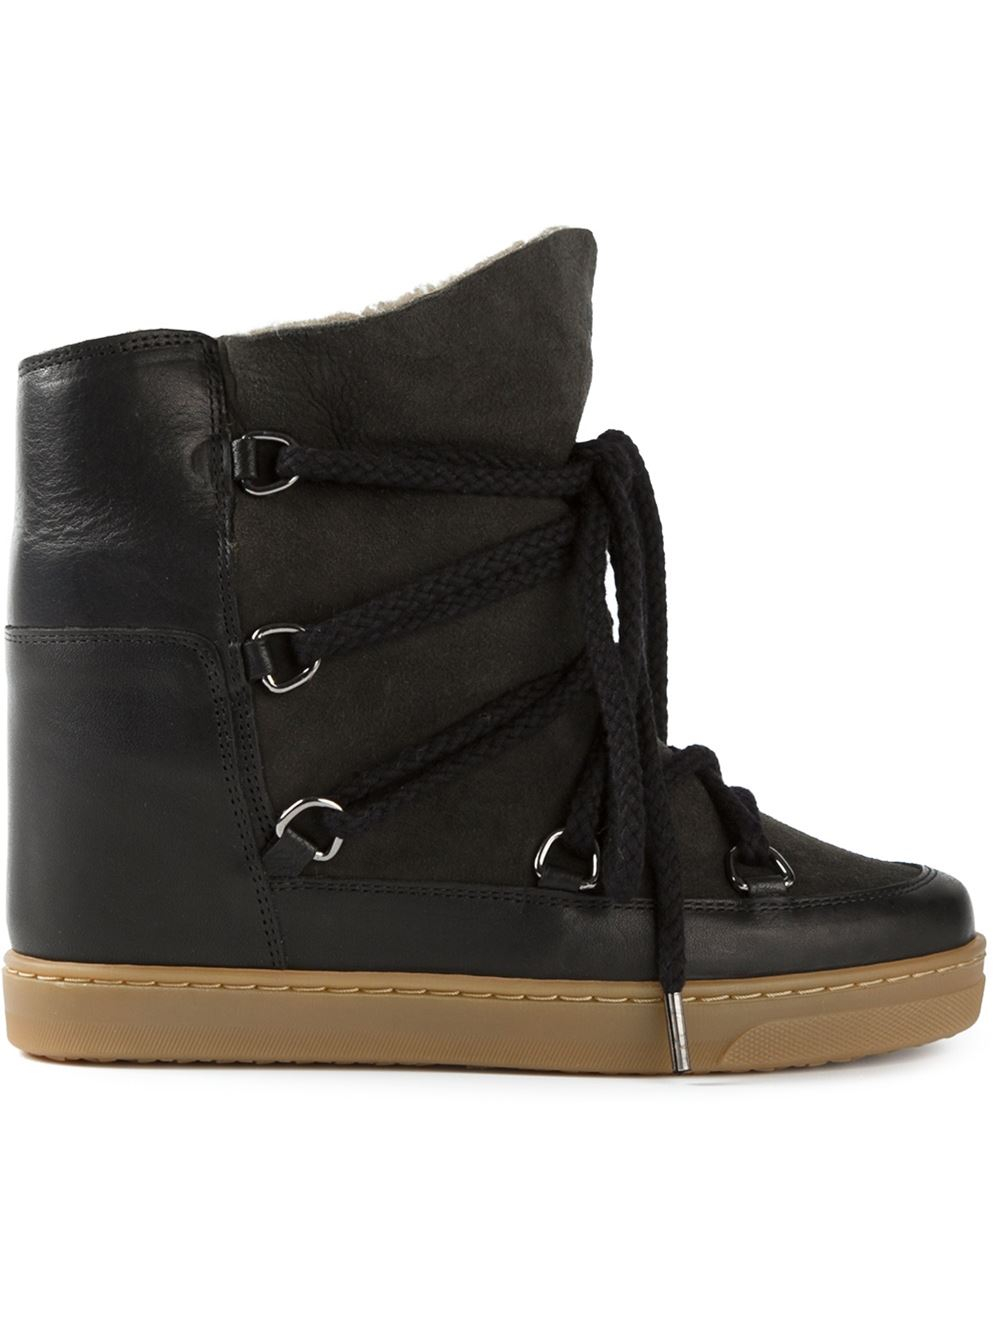 Isabel Marant 'Nowles' Lace-Up Boots in Black - Lyst